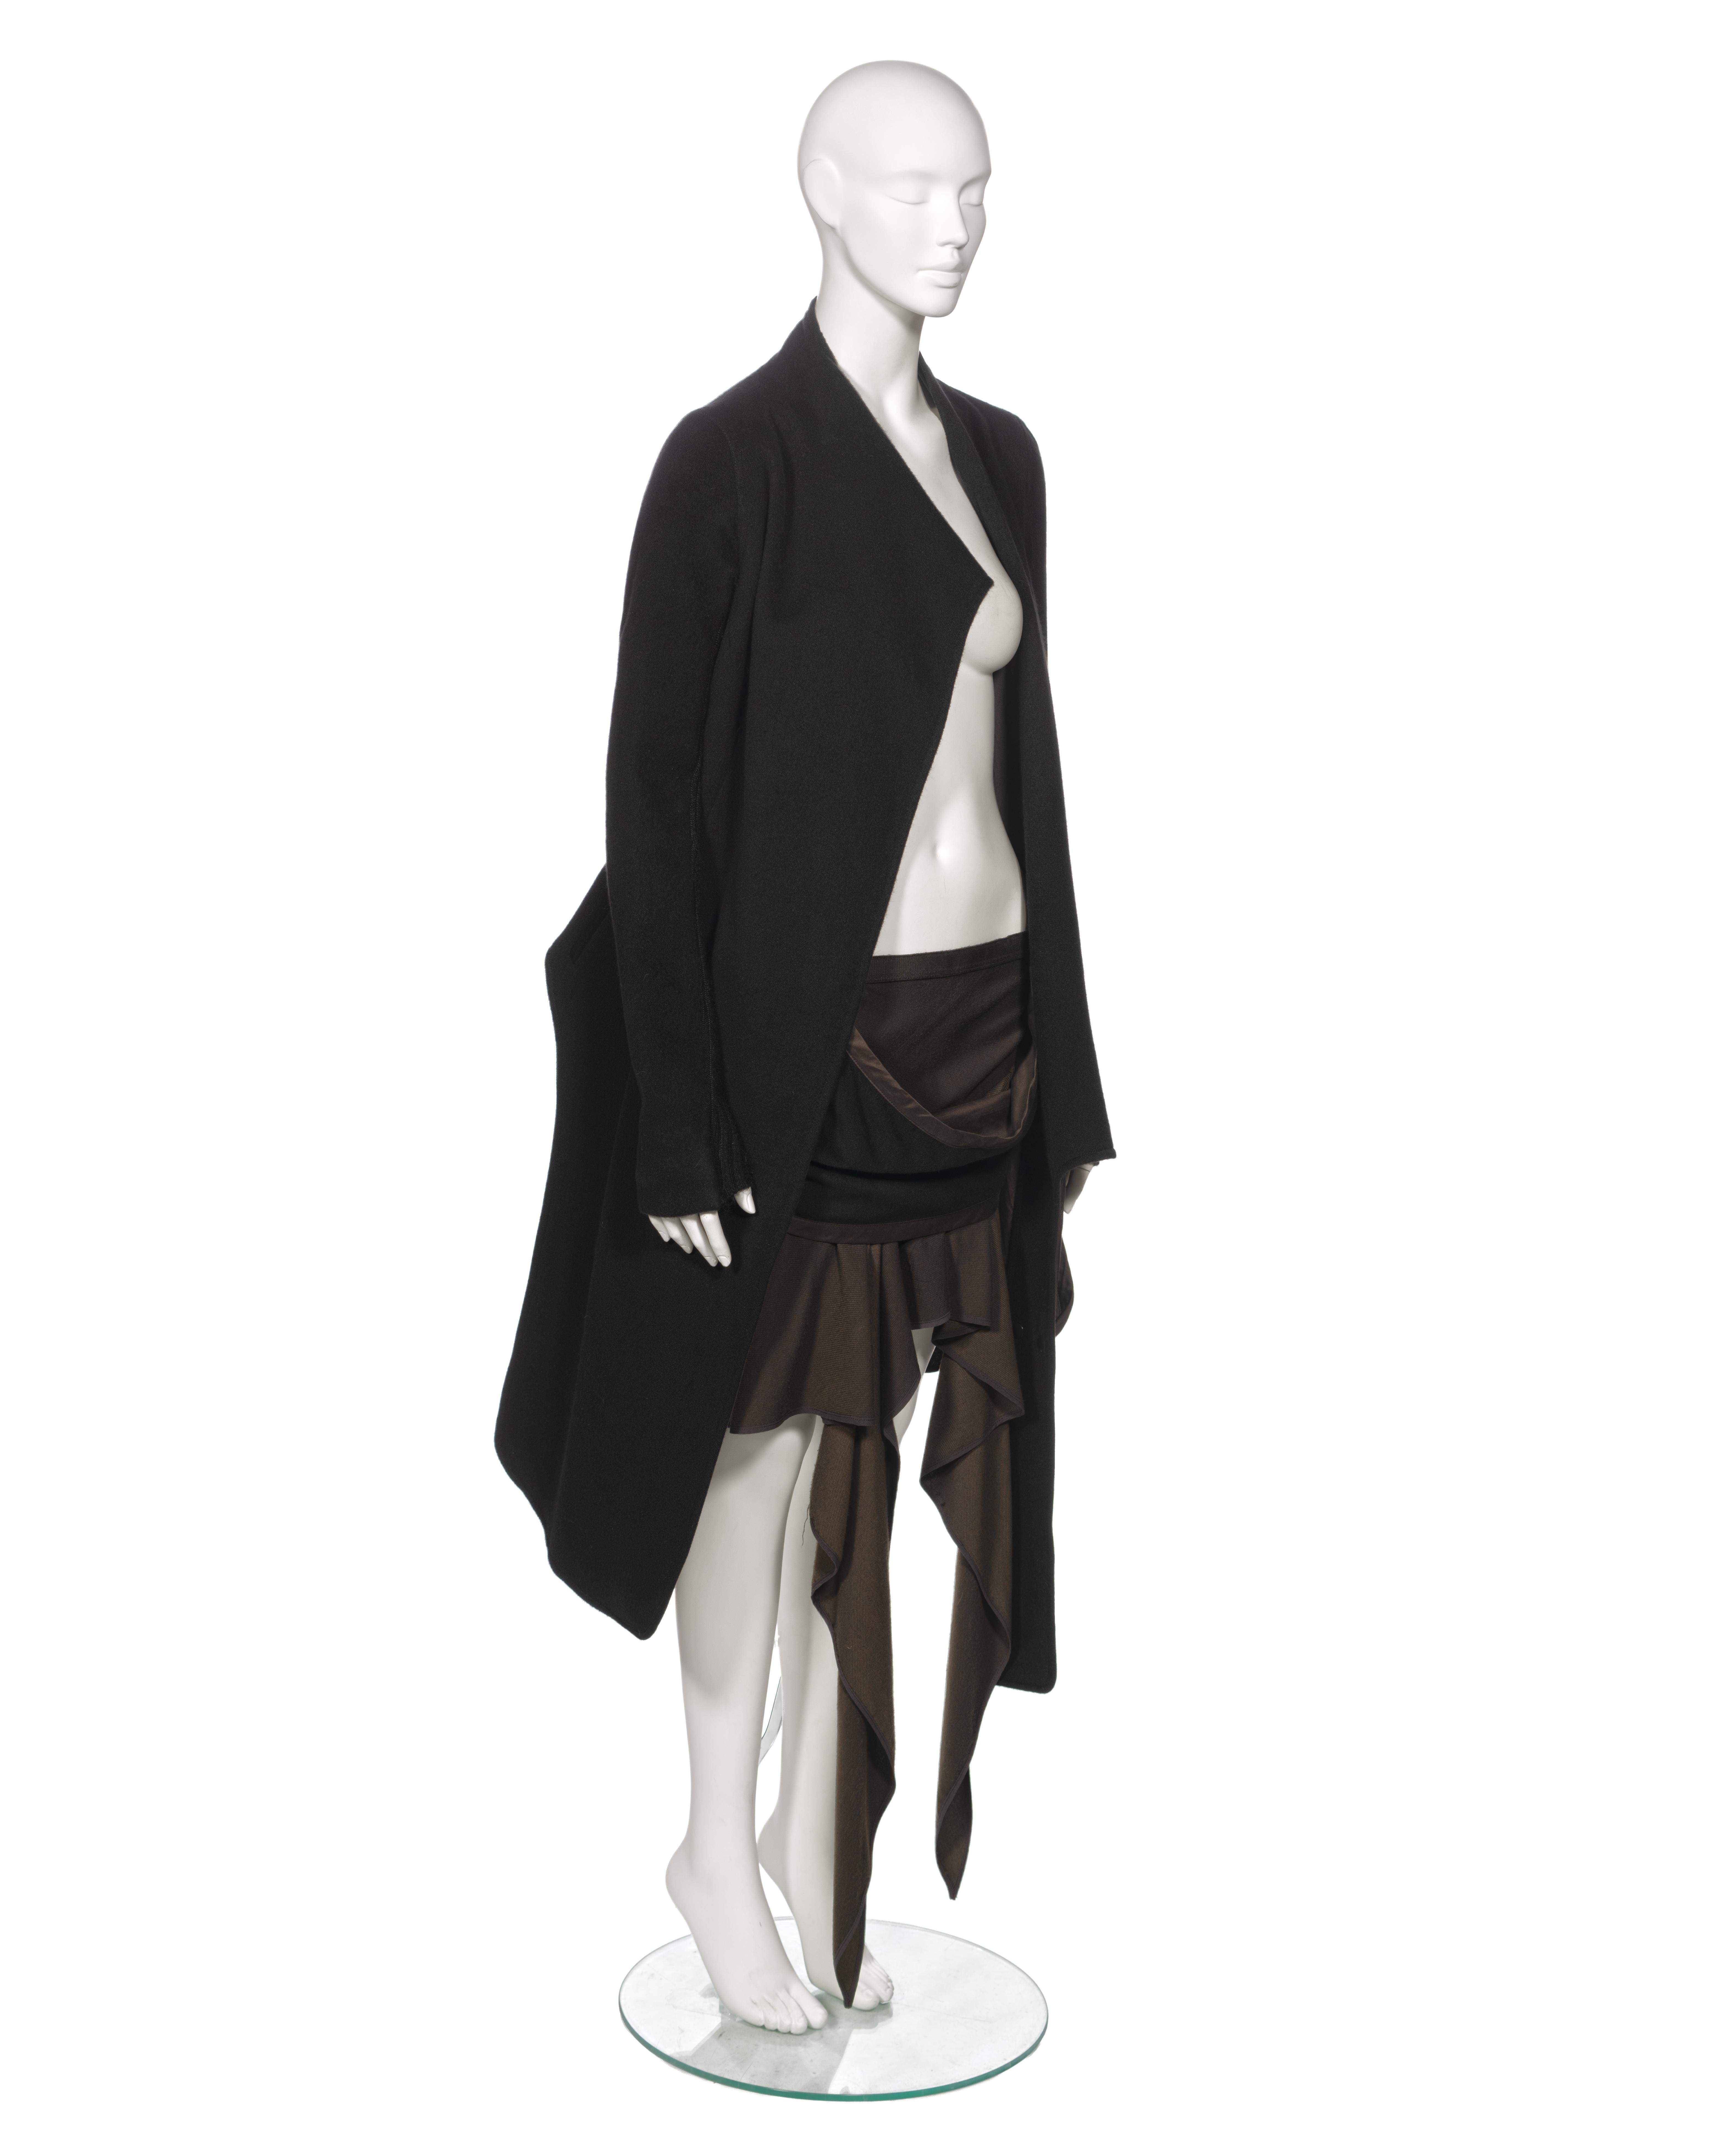 Rick Owens Angora Jacket and Cashmere Skirt 'Queen' Ensemble, fw 2004 For Sale 11